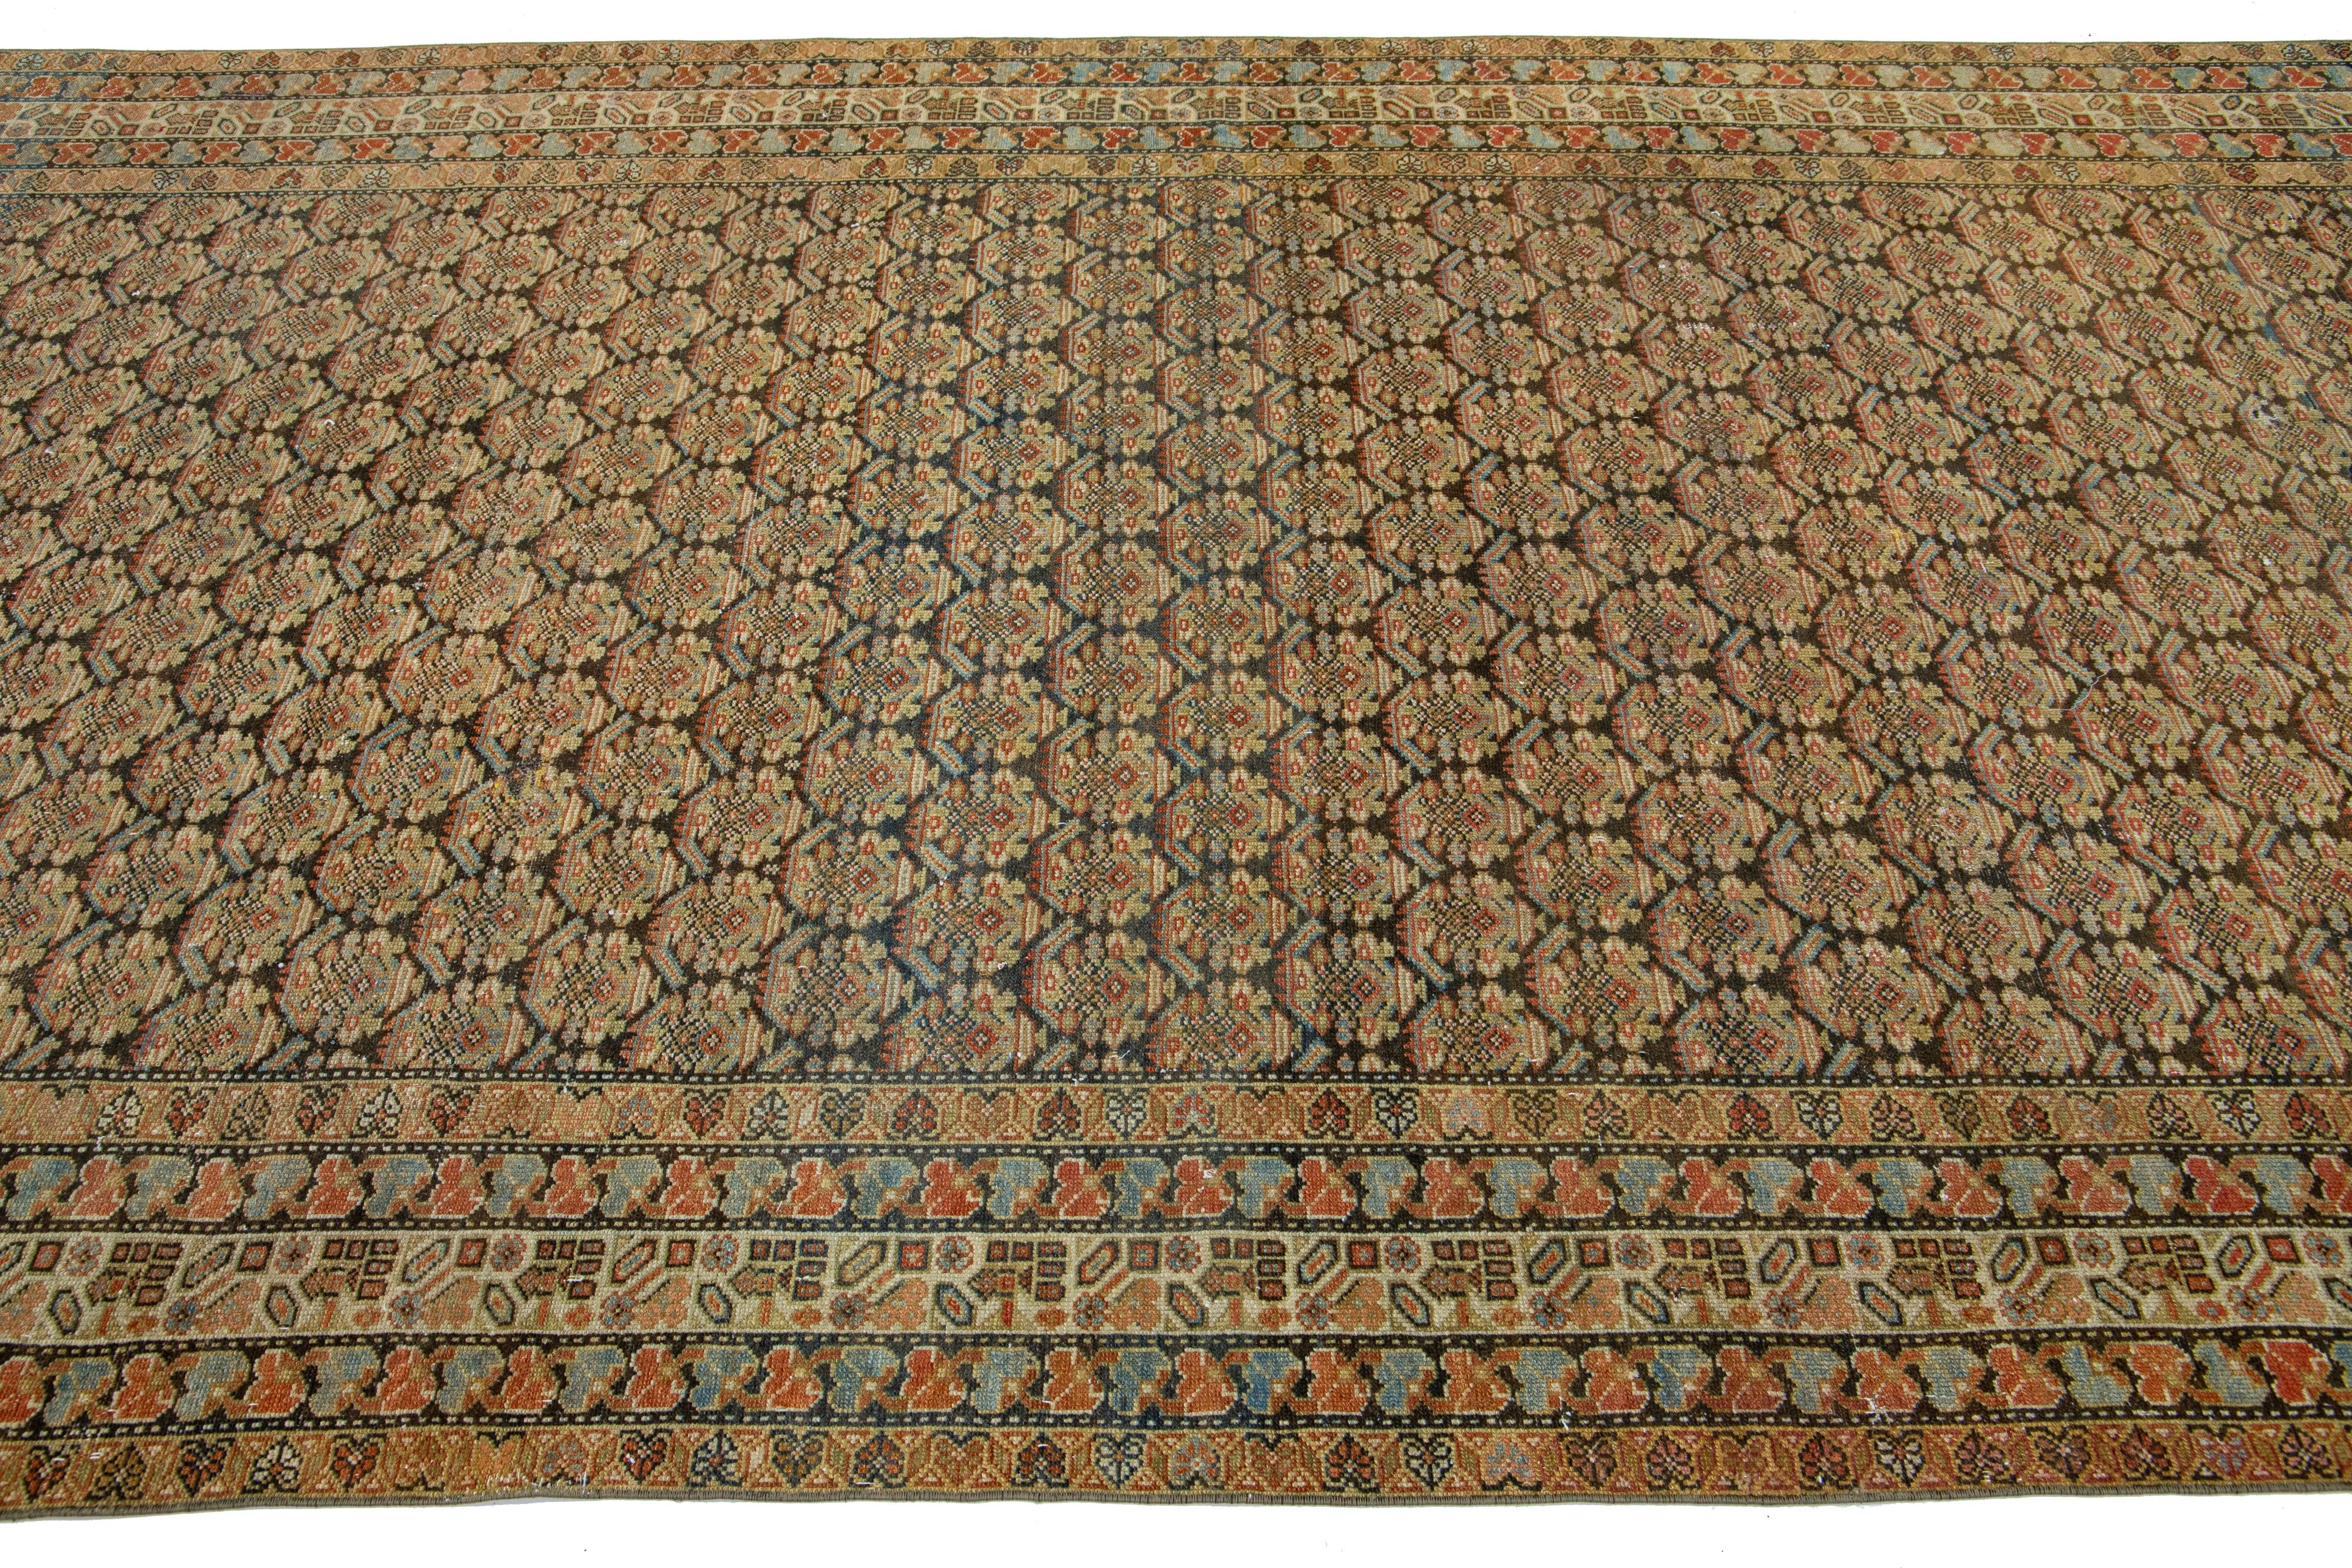 Brown Handmade Antique Persian Malayer Wool Rug with Allover Pattern In Excellent Condition For Sale In Norwalk, CT